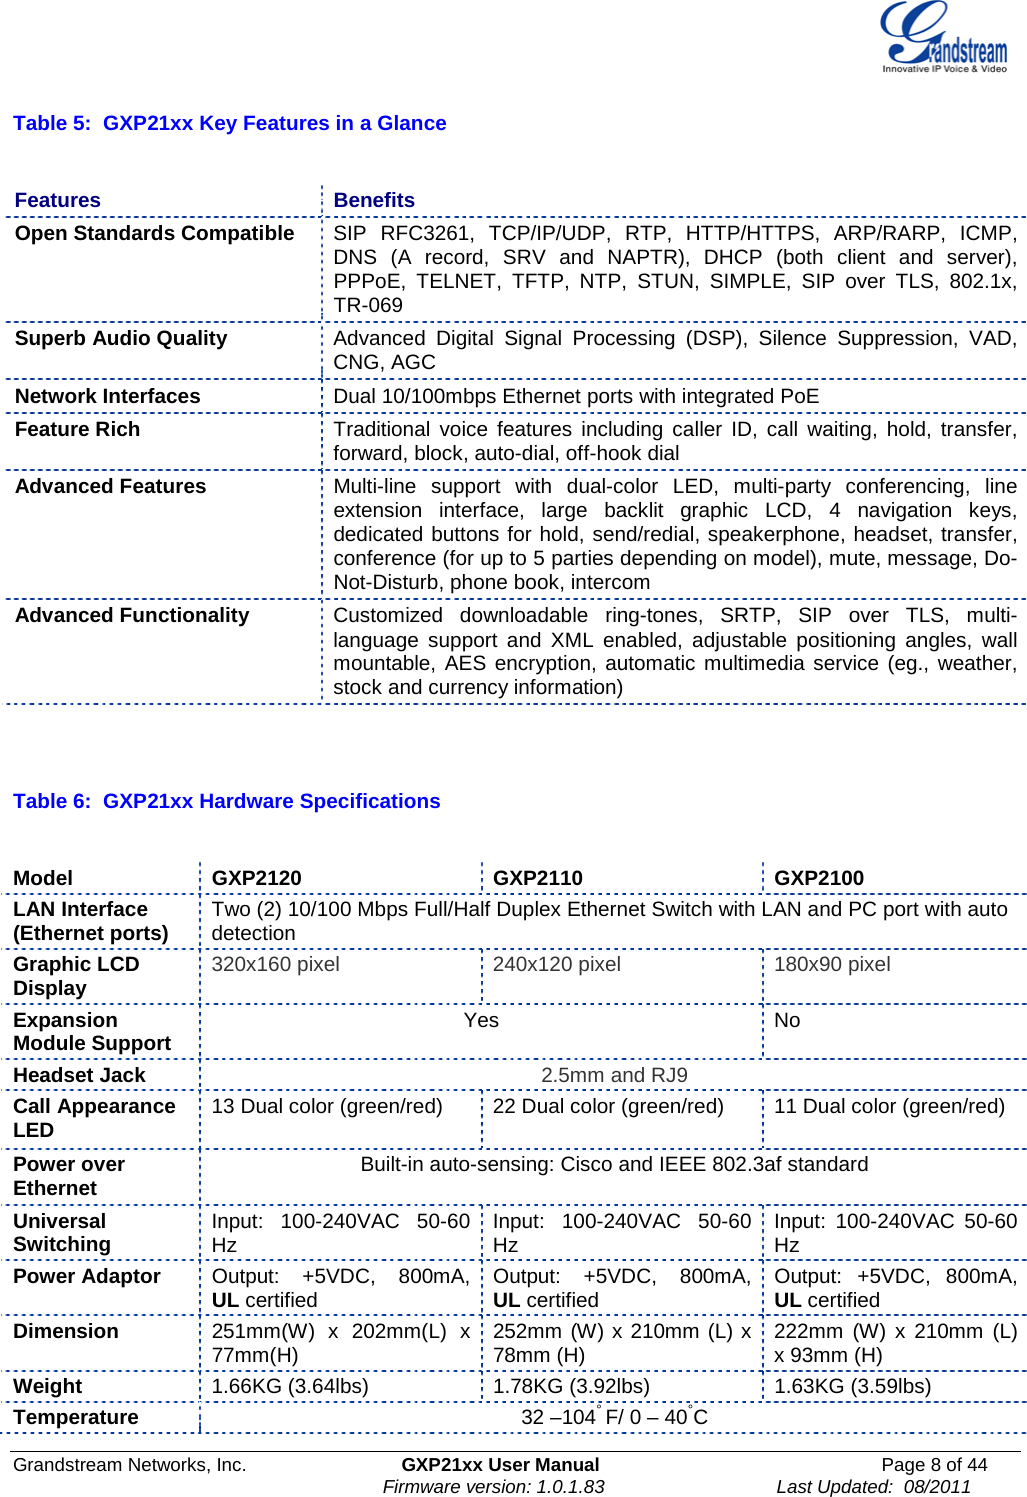  Grandstream Networks, Inc. GXP21xx User Manual Page 8 of 44                                                              Firmware version: 1.0.1.83                                 Last Updated:  08/2011  Table 5:  GXP21xx Key Features in a Glance  Features Benefits Open Standards Compatible SIP RFC3261, TCP/IP/UDP, RTP, HTTP/HTTPS, ARP/RARP, ICMP, DNS (A record, SRV and NAPTR), DHCP (both client and server), PPPoE,  TELNET, TFTP, NTP, STUN,  SIMPLE, SIP over TLS, 802.1x, TR-069 Superb Audio Quality Advanced Digital Signal Processing (DSP), Silence Suppression, VAD, CNG, AGC Network Interfaces Dual 10/100mbps Ethernet ports with integrated PoE Feature Rich Traditional voice features including caller ID, call waiting, hold, transfer, forward, block, auto-dial, off-hook dial Advanced Features Multi-line support with dual-color LED, multi-party conferencing, line extension interface, large backlit graphic LCD,  4 navigation keys, dedicated buttons for hold, send/redial, speakerphone, headset, transfer, conference (for up to 5 parties depending on model), mute, message, Do-Not-Disturb, phone book, intercom Advanced Functionality Customized downloadable ring-tones, SRTP, SIP over TLS,  multi-language support and XML enabled, adjustable positioning angles, wall mountable, AES encryption, automatic multimedia service (eg., weather, stock and currency information)   Table 6:  GXP21xx Hardware Specifications  Model GXP2120 GXP2110 GXP2100 LAN Interface (Ethernet ports) Two (2) 10/100 Mbps Full/Half Duplex Ethernet Switch with LAN and PC port with auto detection Graphic LCD Display 320x160 pixel  240x120 pixel 180x90 pixel Expansion Module Support  Yes No Headset Jack 2.5mm and RJ9 Call Appearance LED 13 Dual color (green/red)  22 Dual color (green/red)  11 Dual color (green/red) Power over Ethernet Built-in auto-sensing: Cisco and IEEE 802.3af standard Universal Switching Input: 100-240VAC 50-60 Hz Input: 100-240VAC 50-60 Hz Input: 100-240VAC 50-60 Hz Power Adaptor Output: +5VDC, 800mA, UL certified  Output: +5VDC, 800mA, UL certified Output: +5VDC, 800mA, UL certified Dimension 251mm(W) x 202mm(L) x 77mm(H)  252mm (W) x 210mm (L) x 78mm (H) 222mm (W) x 210mm (L) x 93mm (H) Weight 1.66KG (3.64lbs) 1.78KG (3.92lbs) 1.63KG (3.59lbs) Temperature 32 –104° F/ 0 – 40°C 